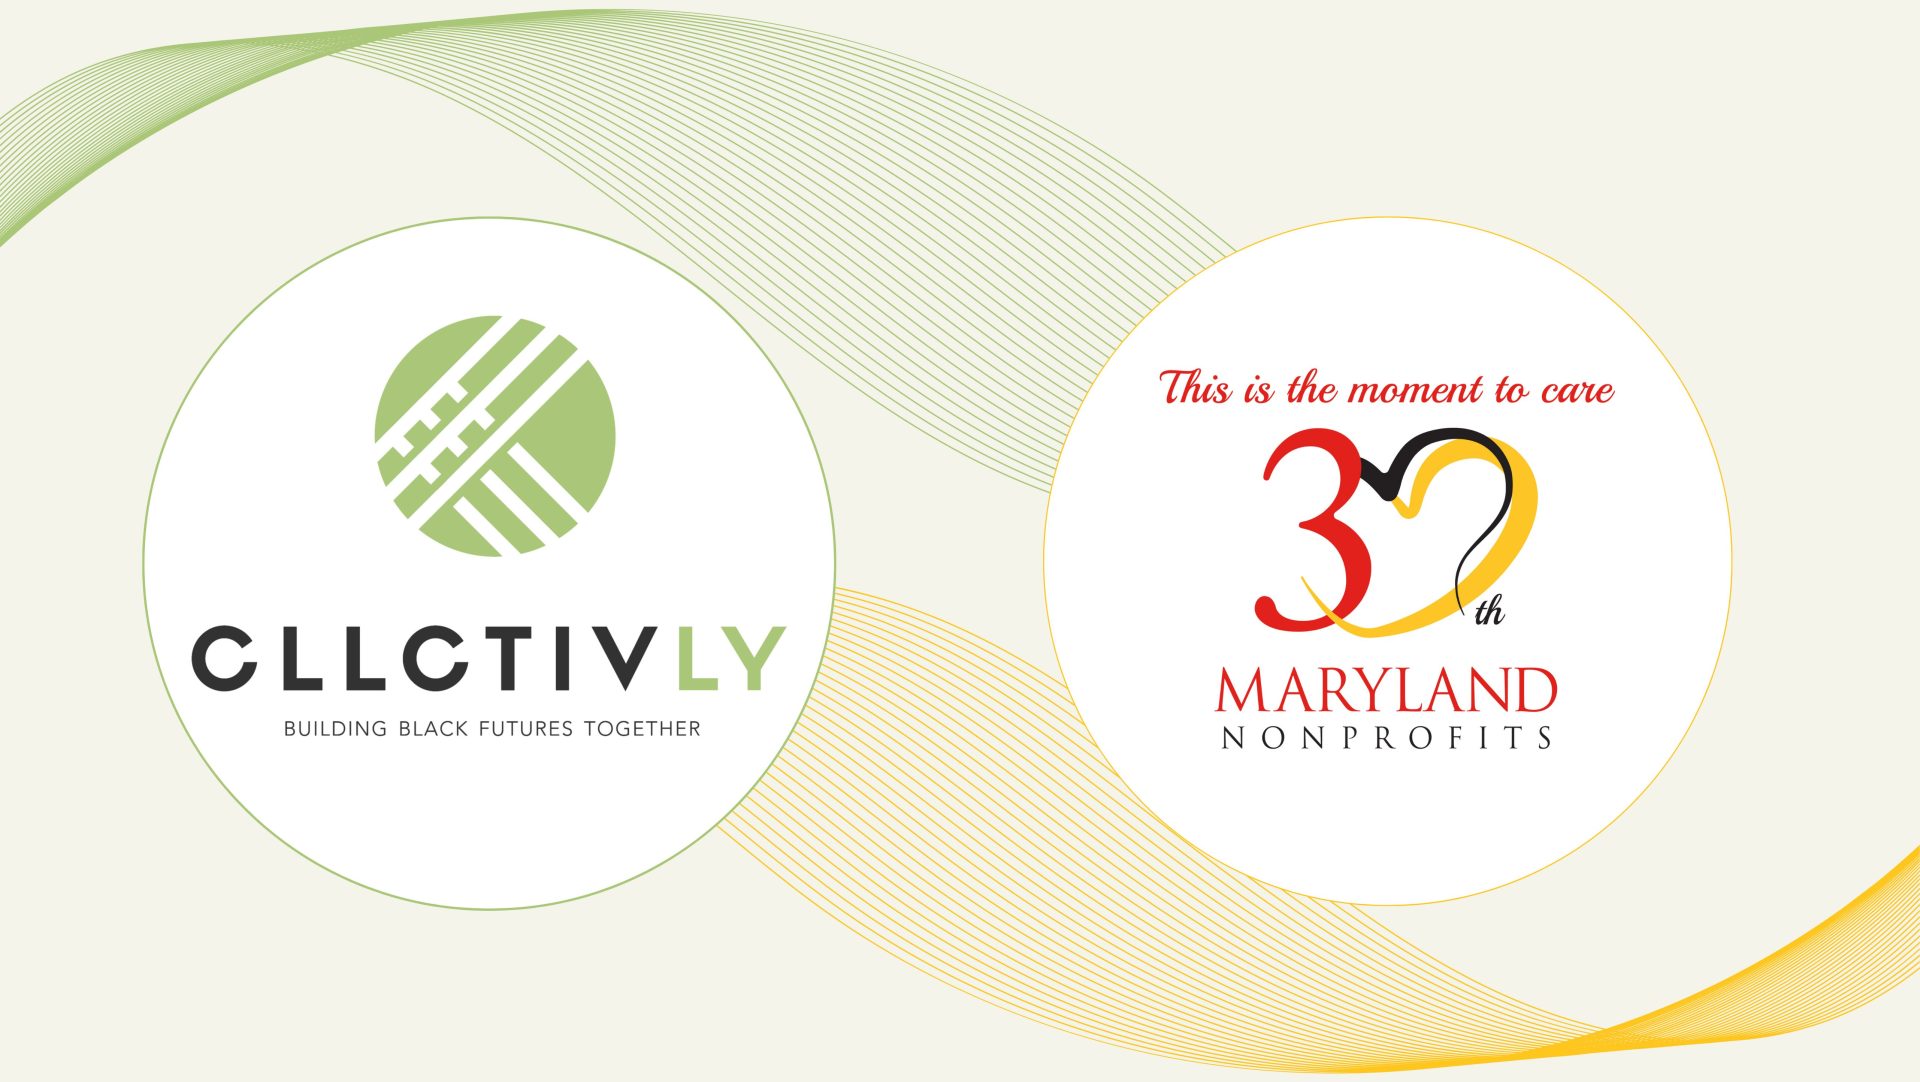 CLLCTIVLY AND MARYLAND NONPROFITS BUILD RESILIENCY OF YOUTH SERVICE PROVIDERS